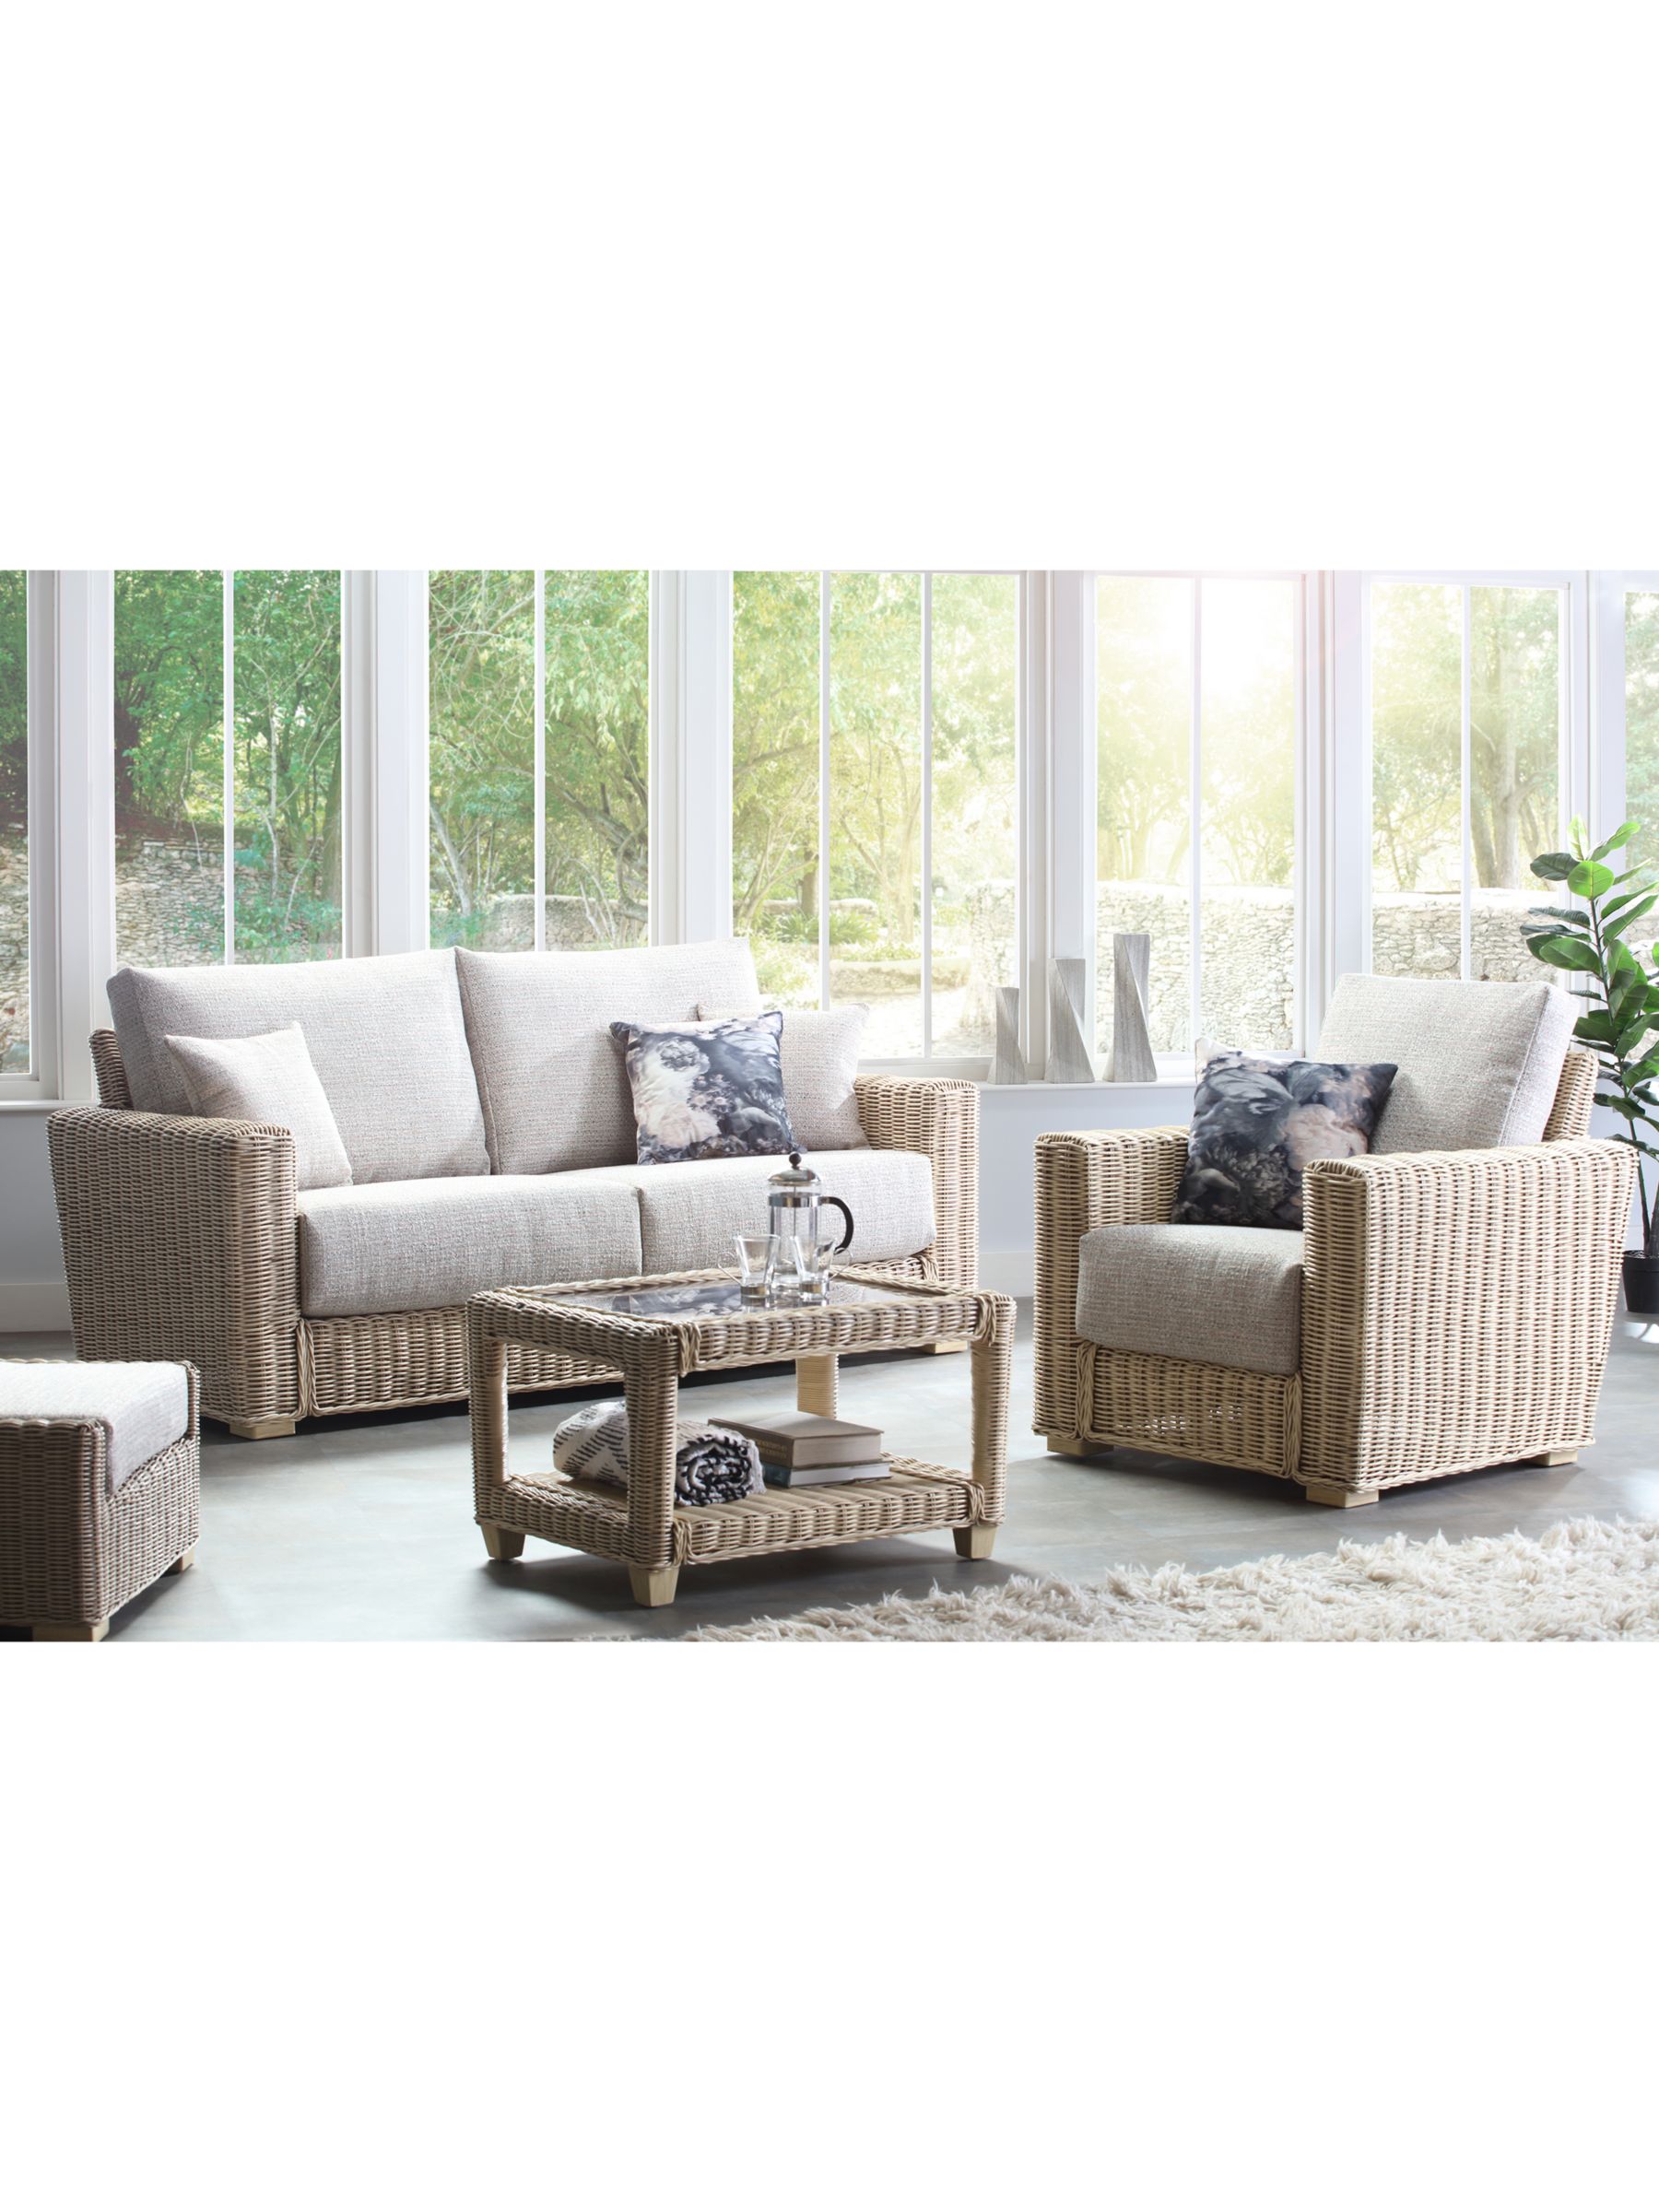 Photo of Desser burford rattan 4-seater lounging table & chairs set natural